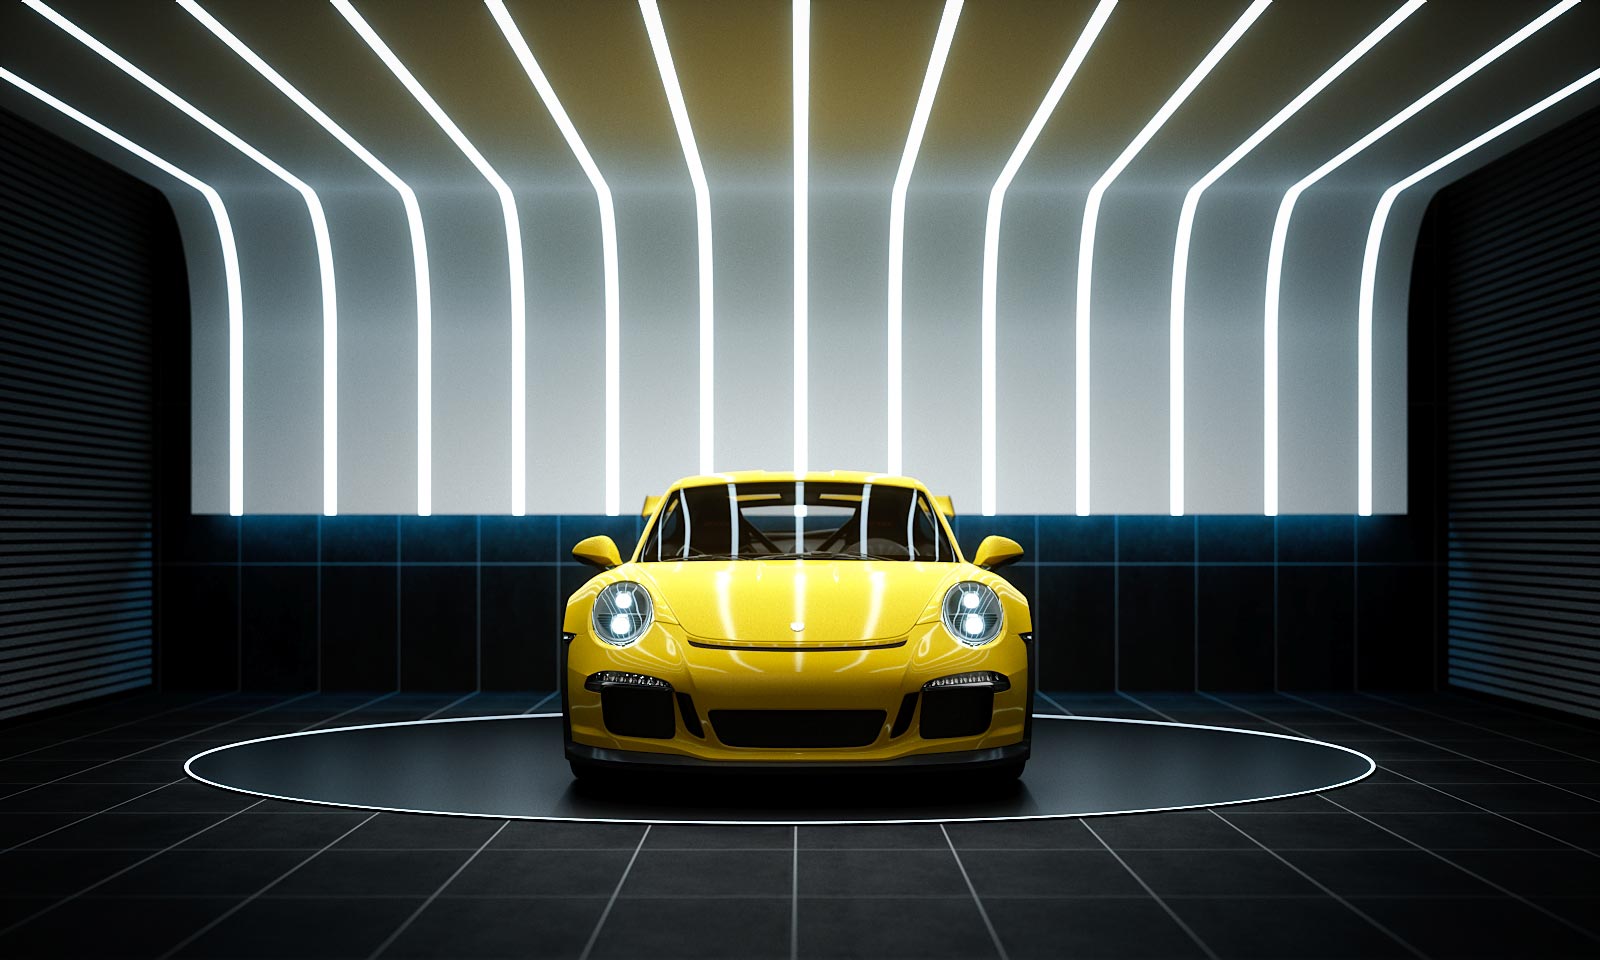 Car Capsule For Porsche 911 GT3 RS With Led Striped Lighting Private Luxury Supercar Showroom